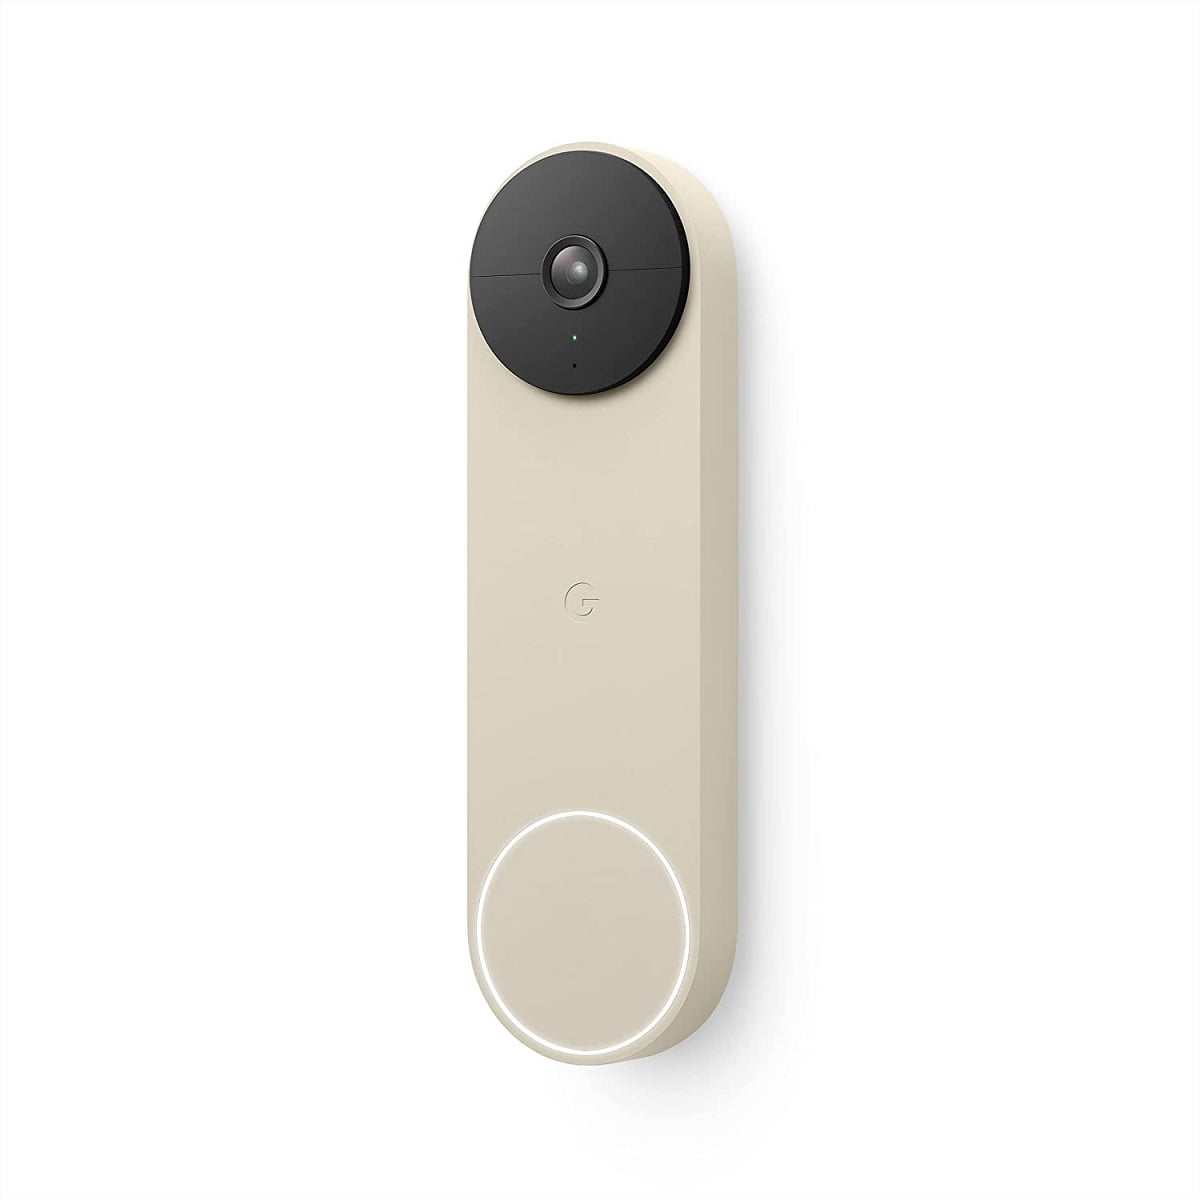 Nest Doorbell Wired Vs Wireless Conclusion